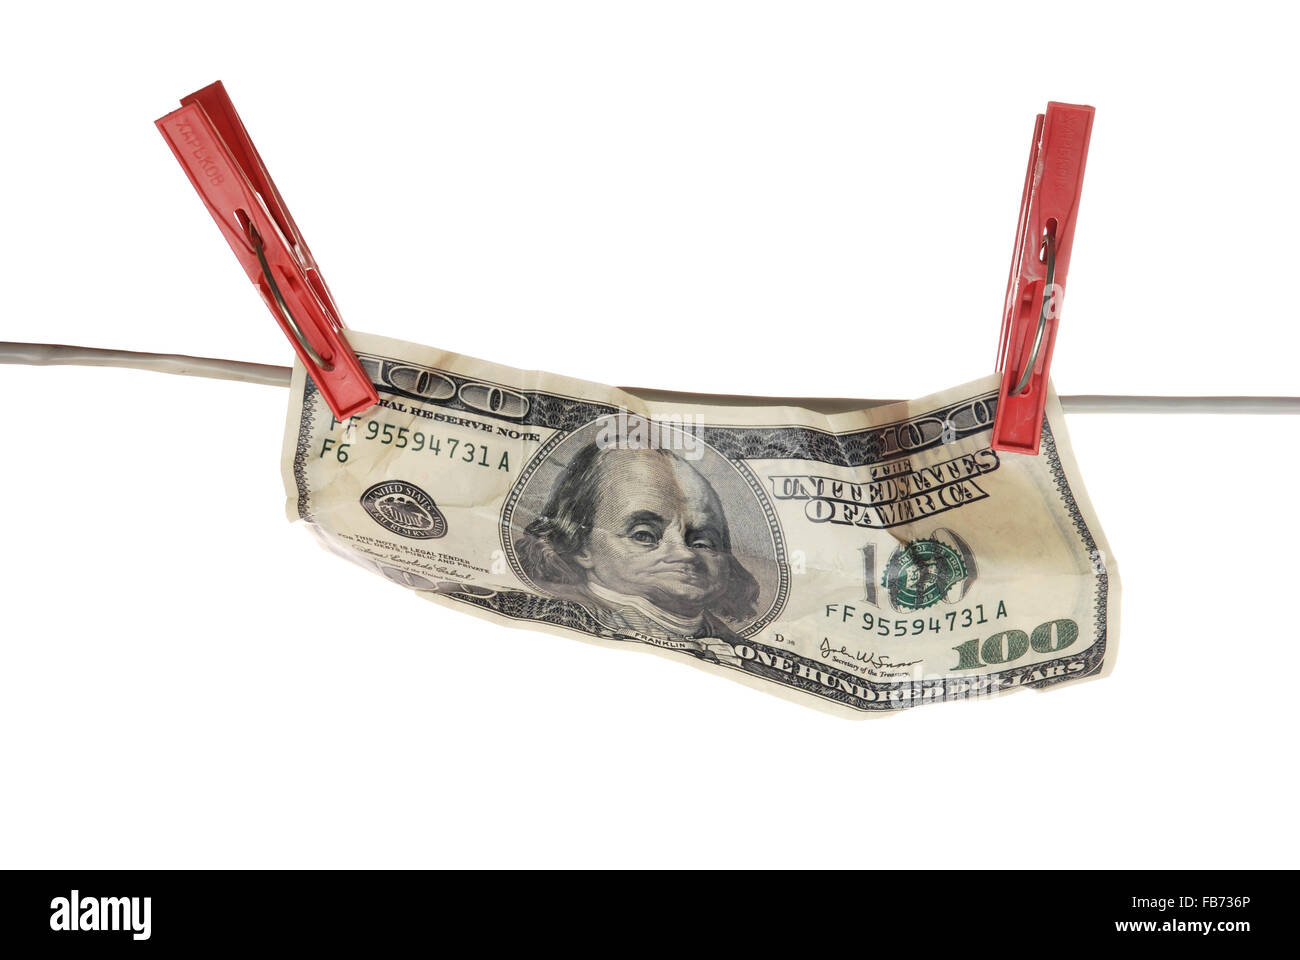 the front of the crumpled 100 dollar bill hanging on a clothesline on a white background. Stock Photo